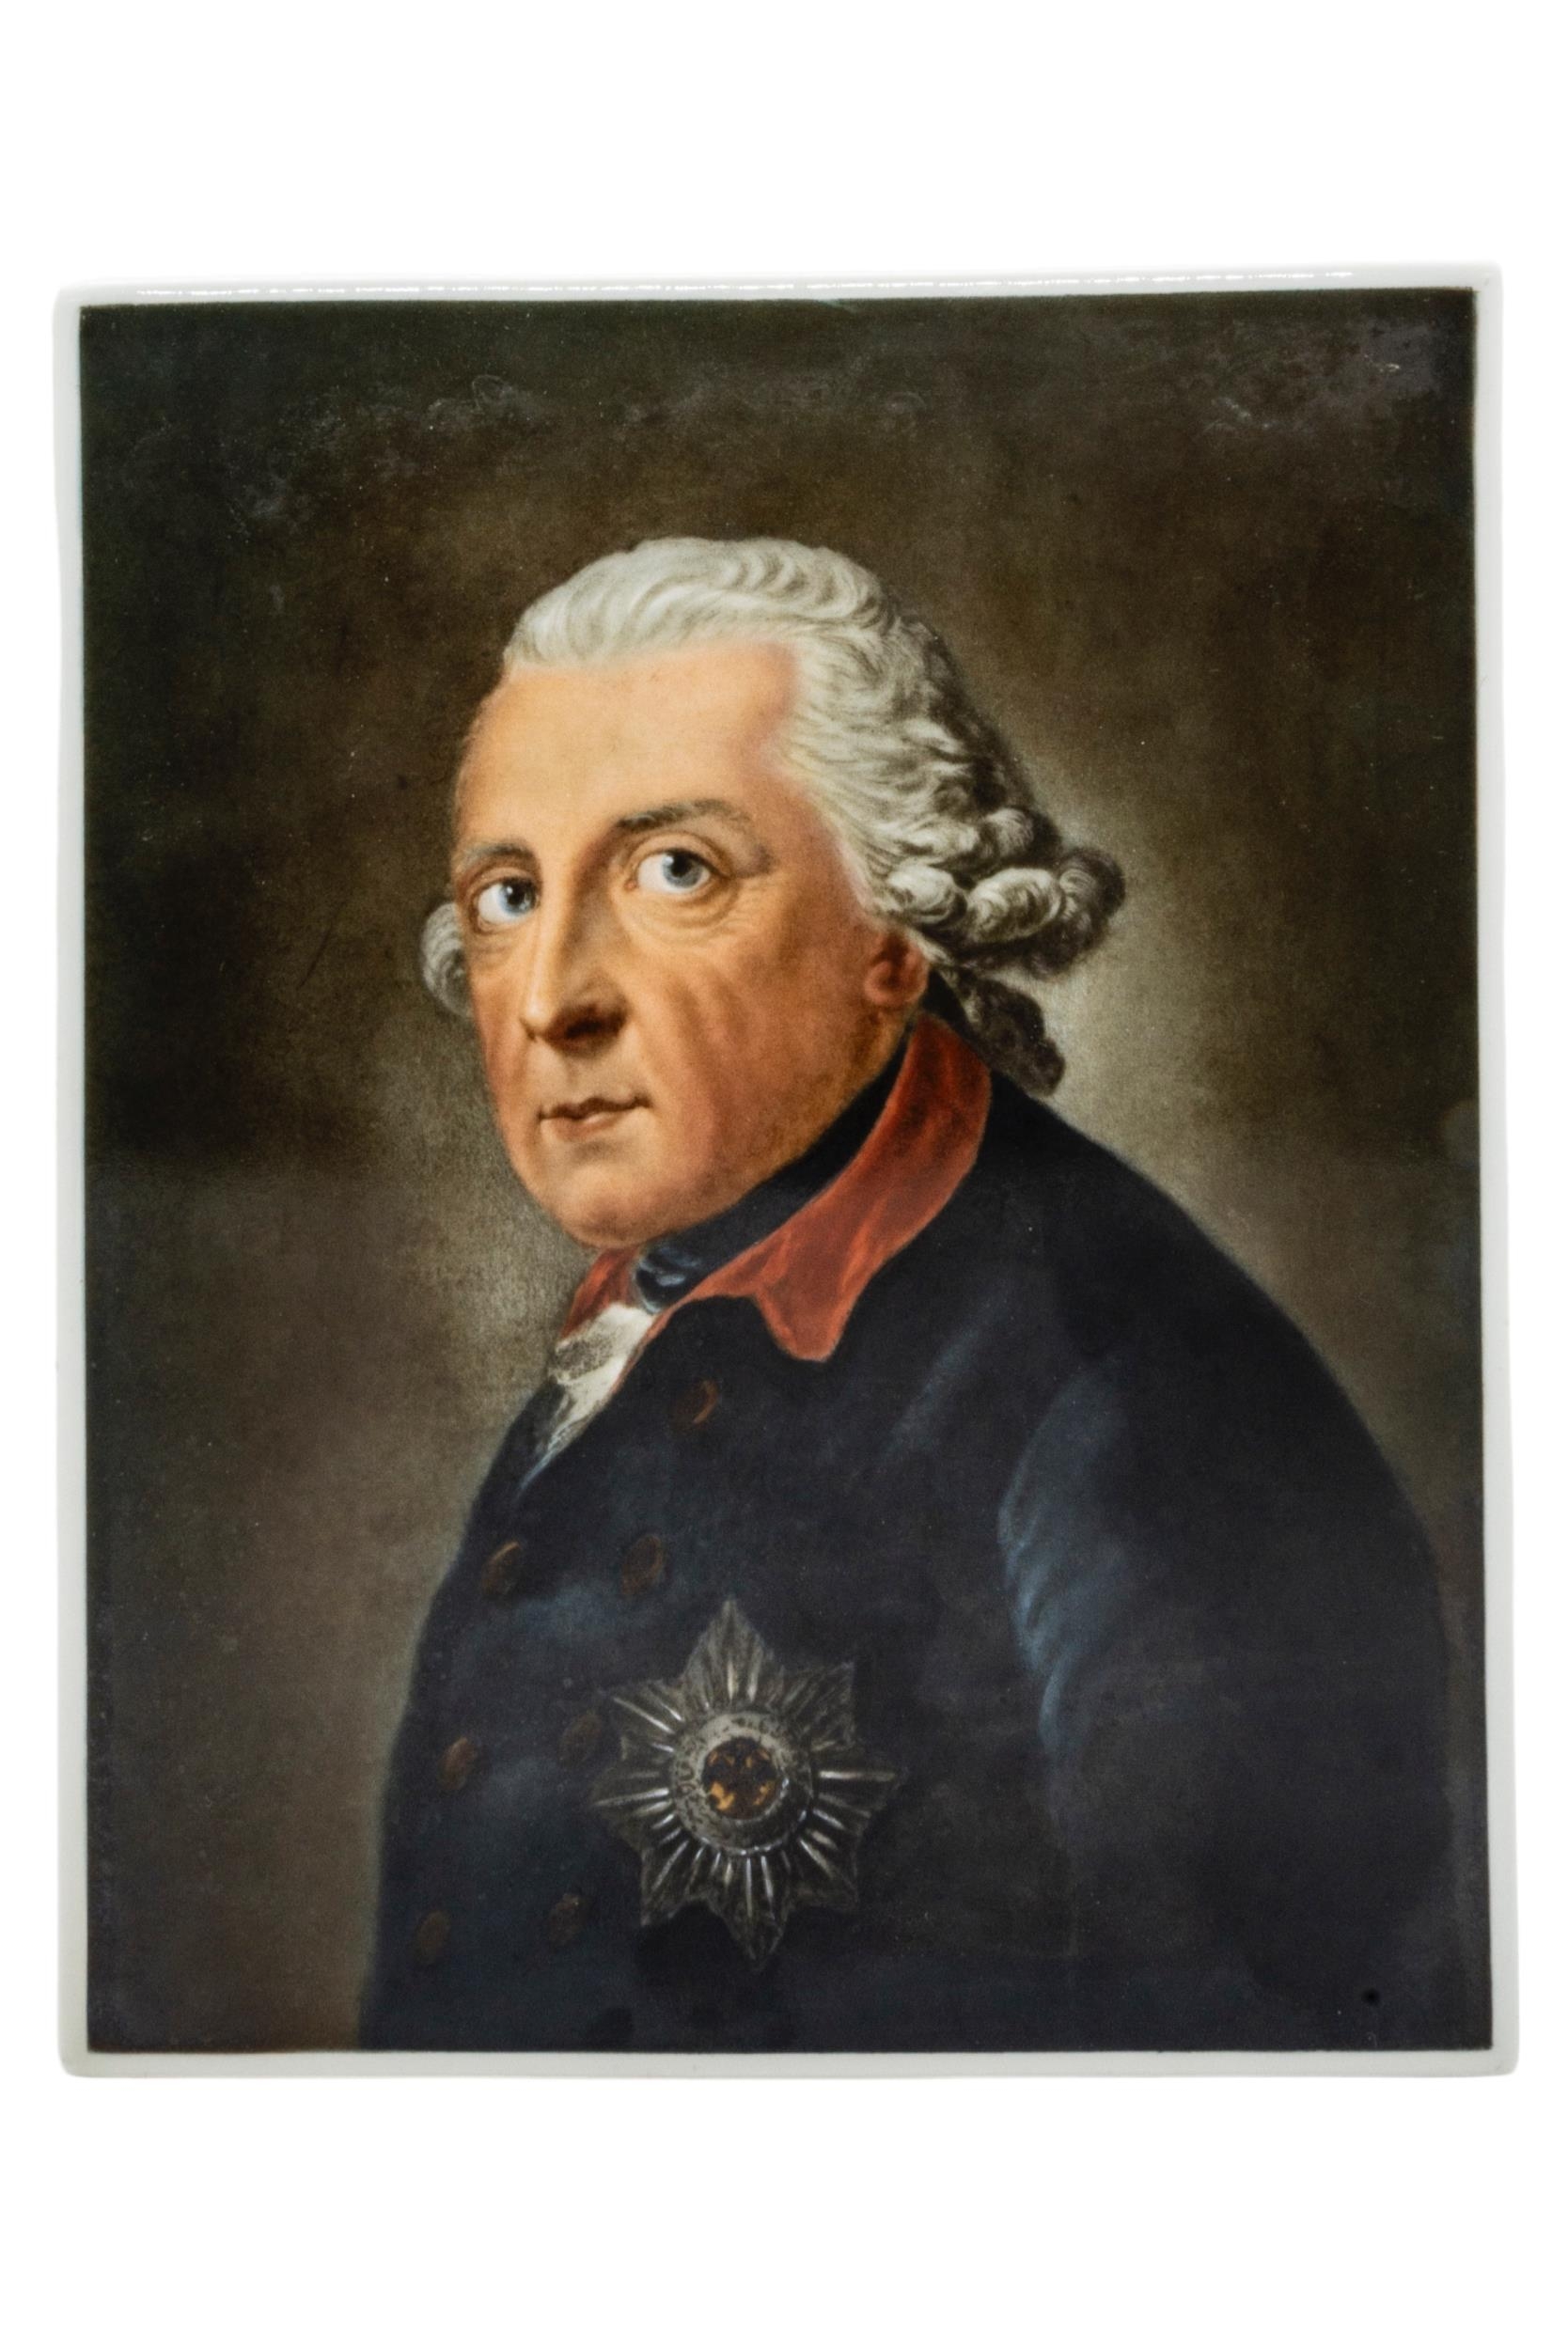 A ROSENTHAL PORCELAIN PORTRAIT PANEL, depicting Frederick the Great, as originally painted by